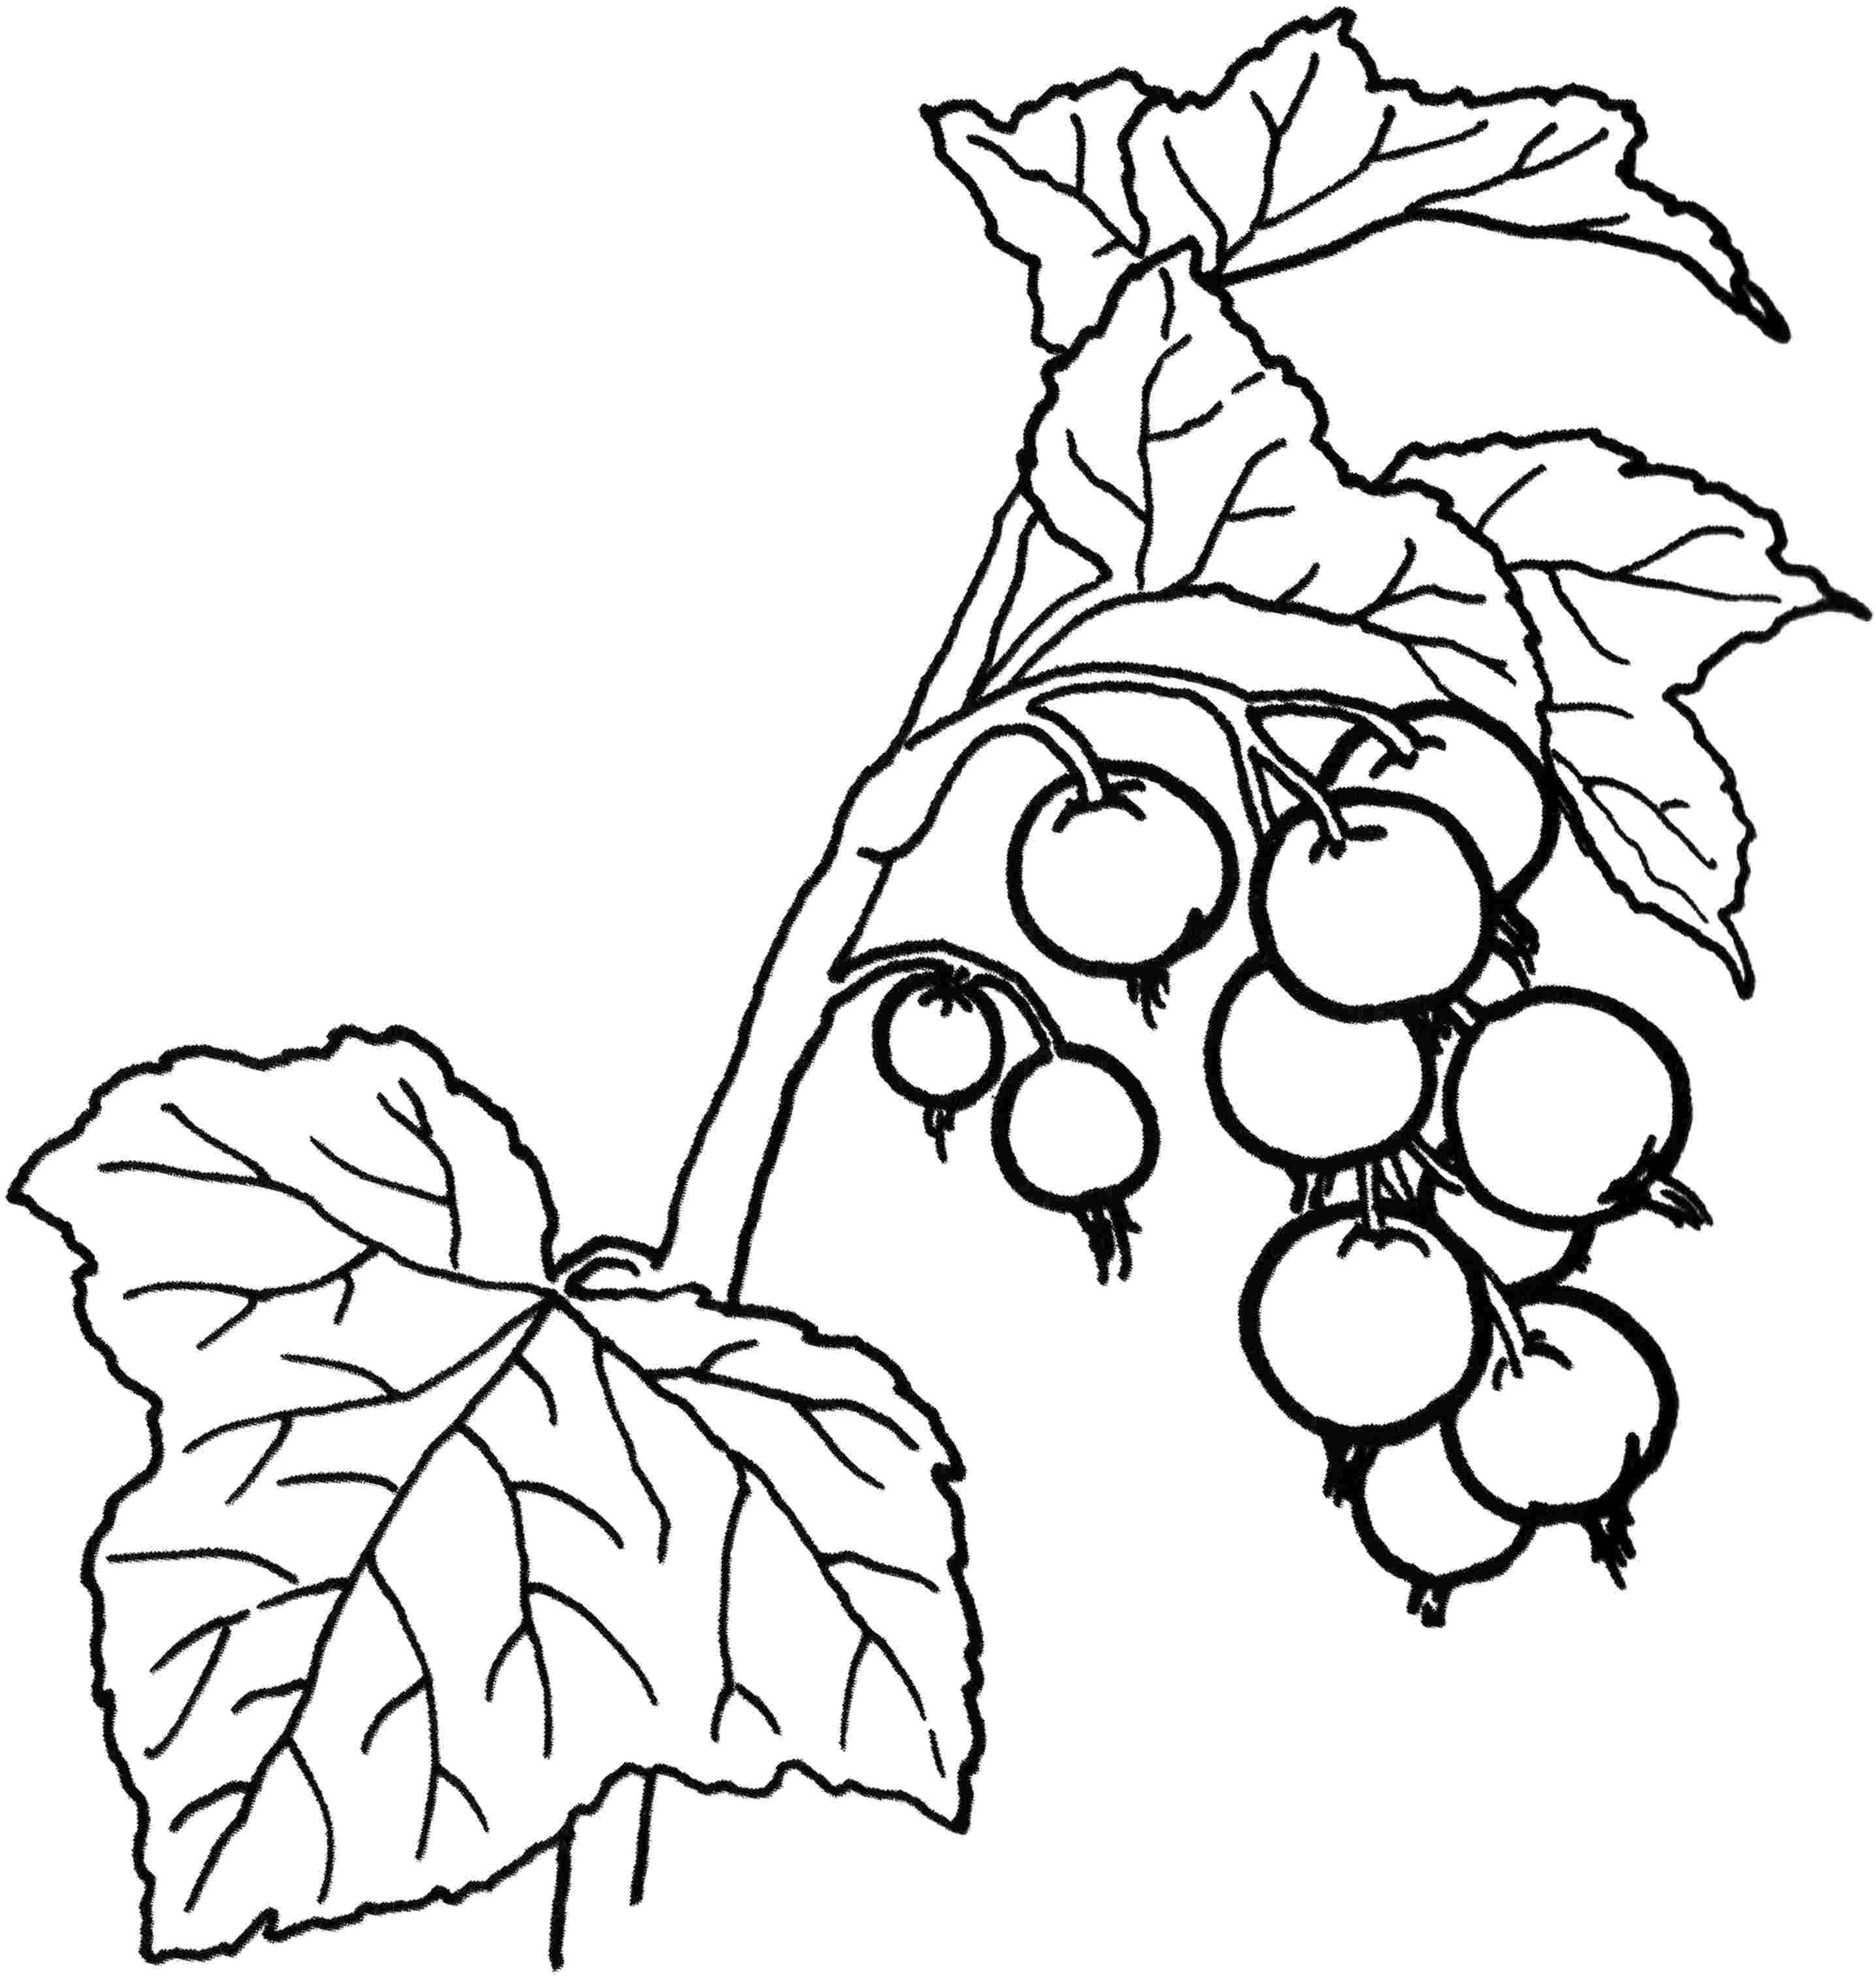 Coloring Branch of currants. Category berries. Tags:  currants.